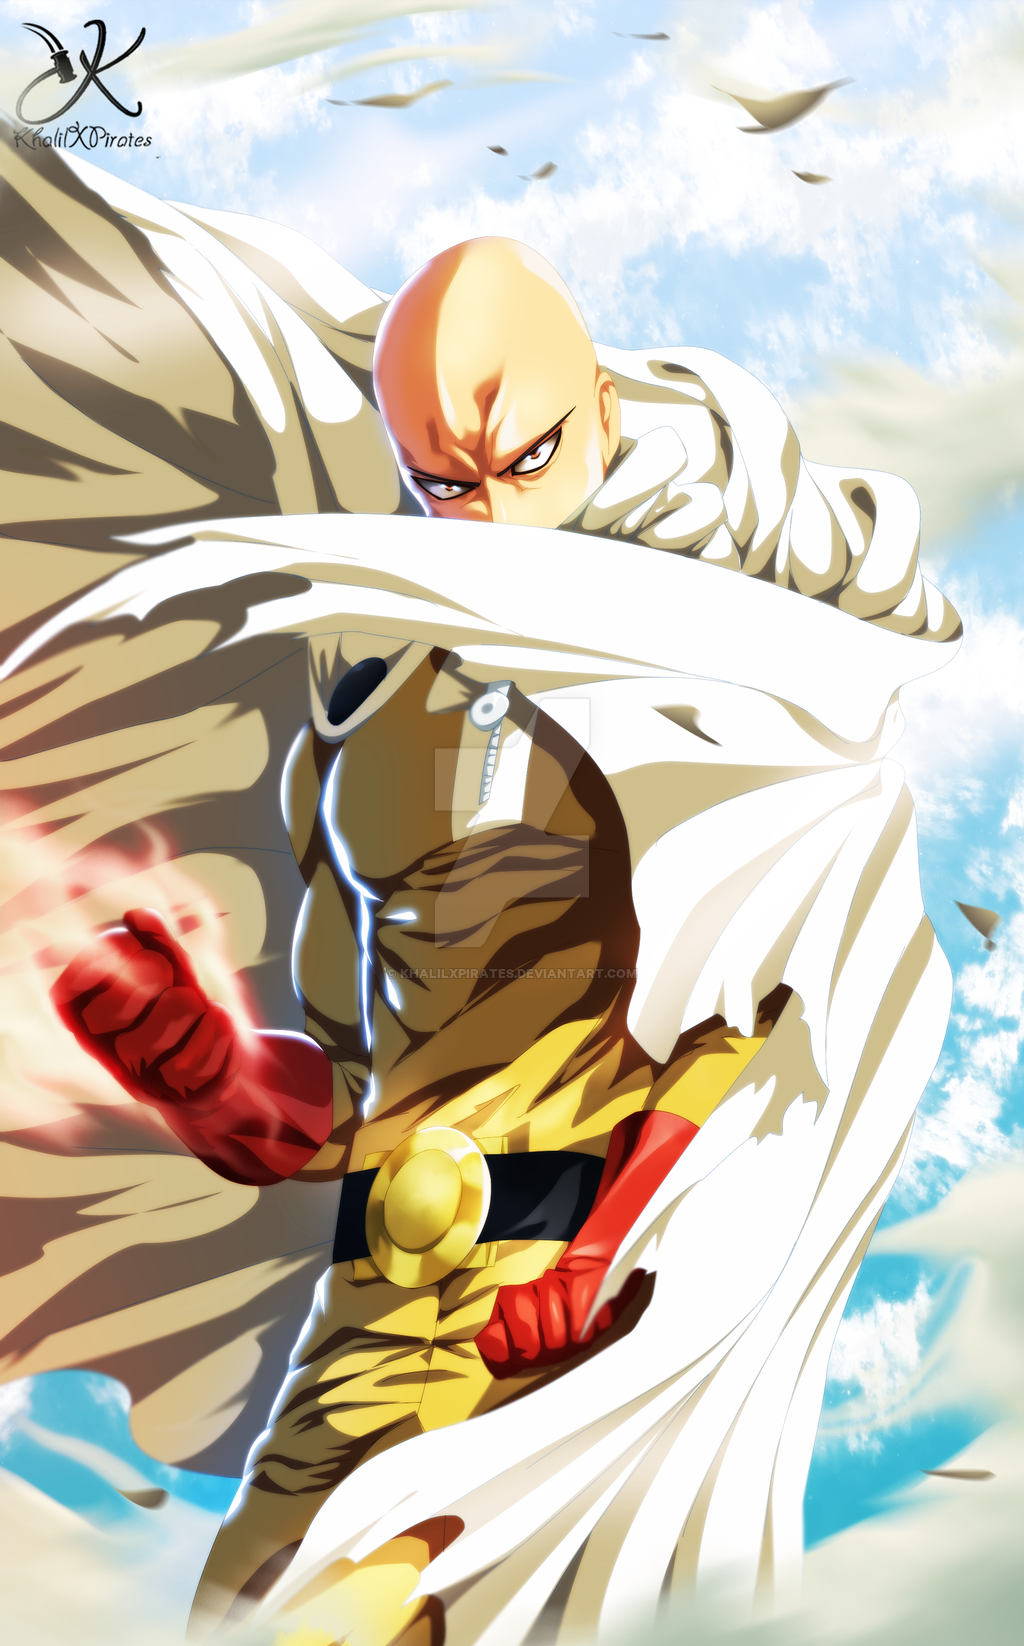 Anime One-Punch Man Picture by KhalilXPirates